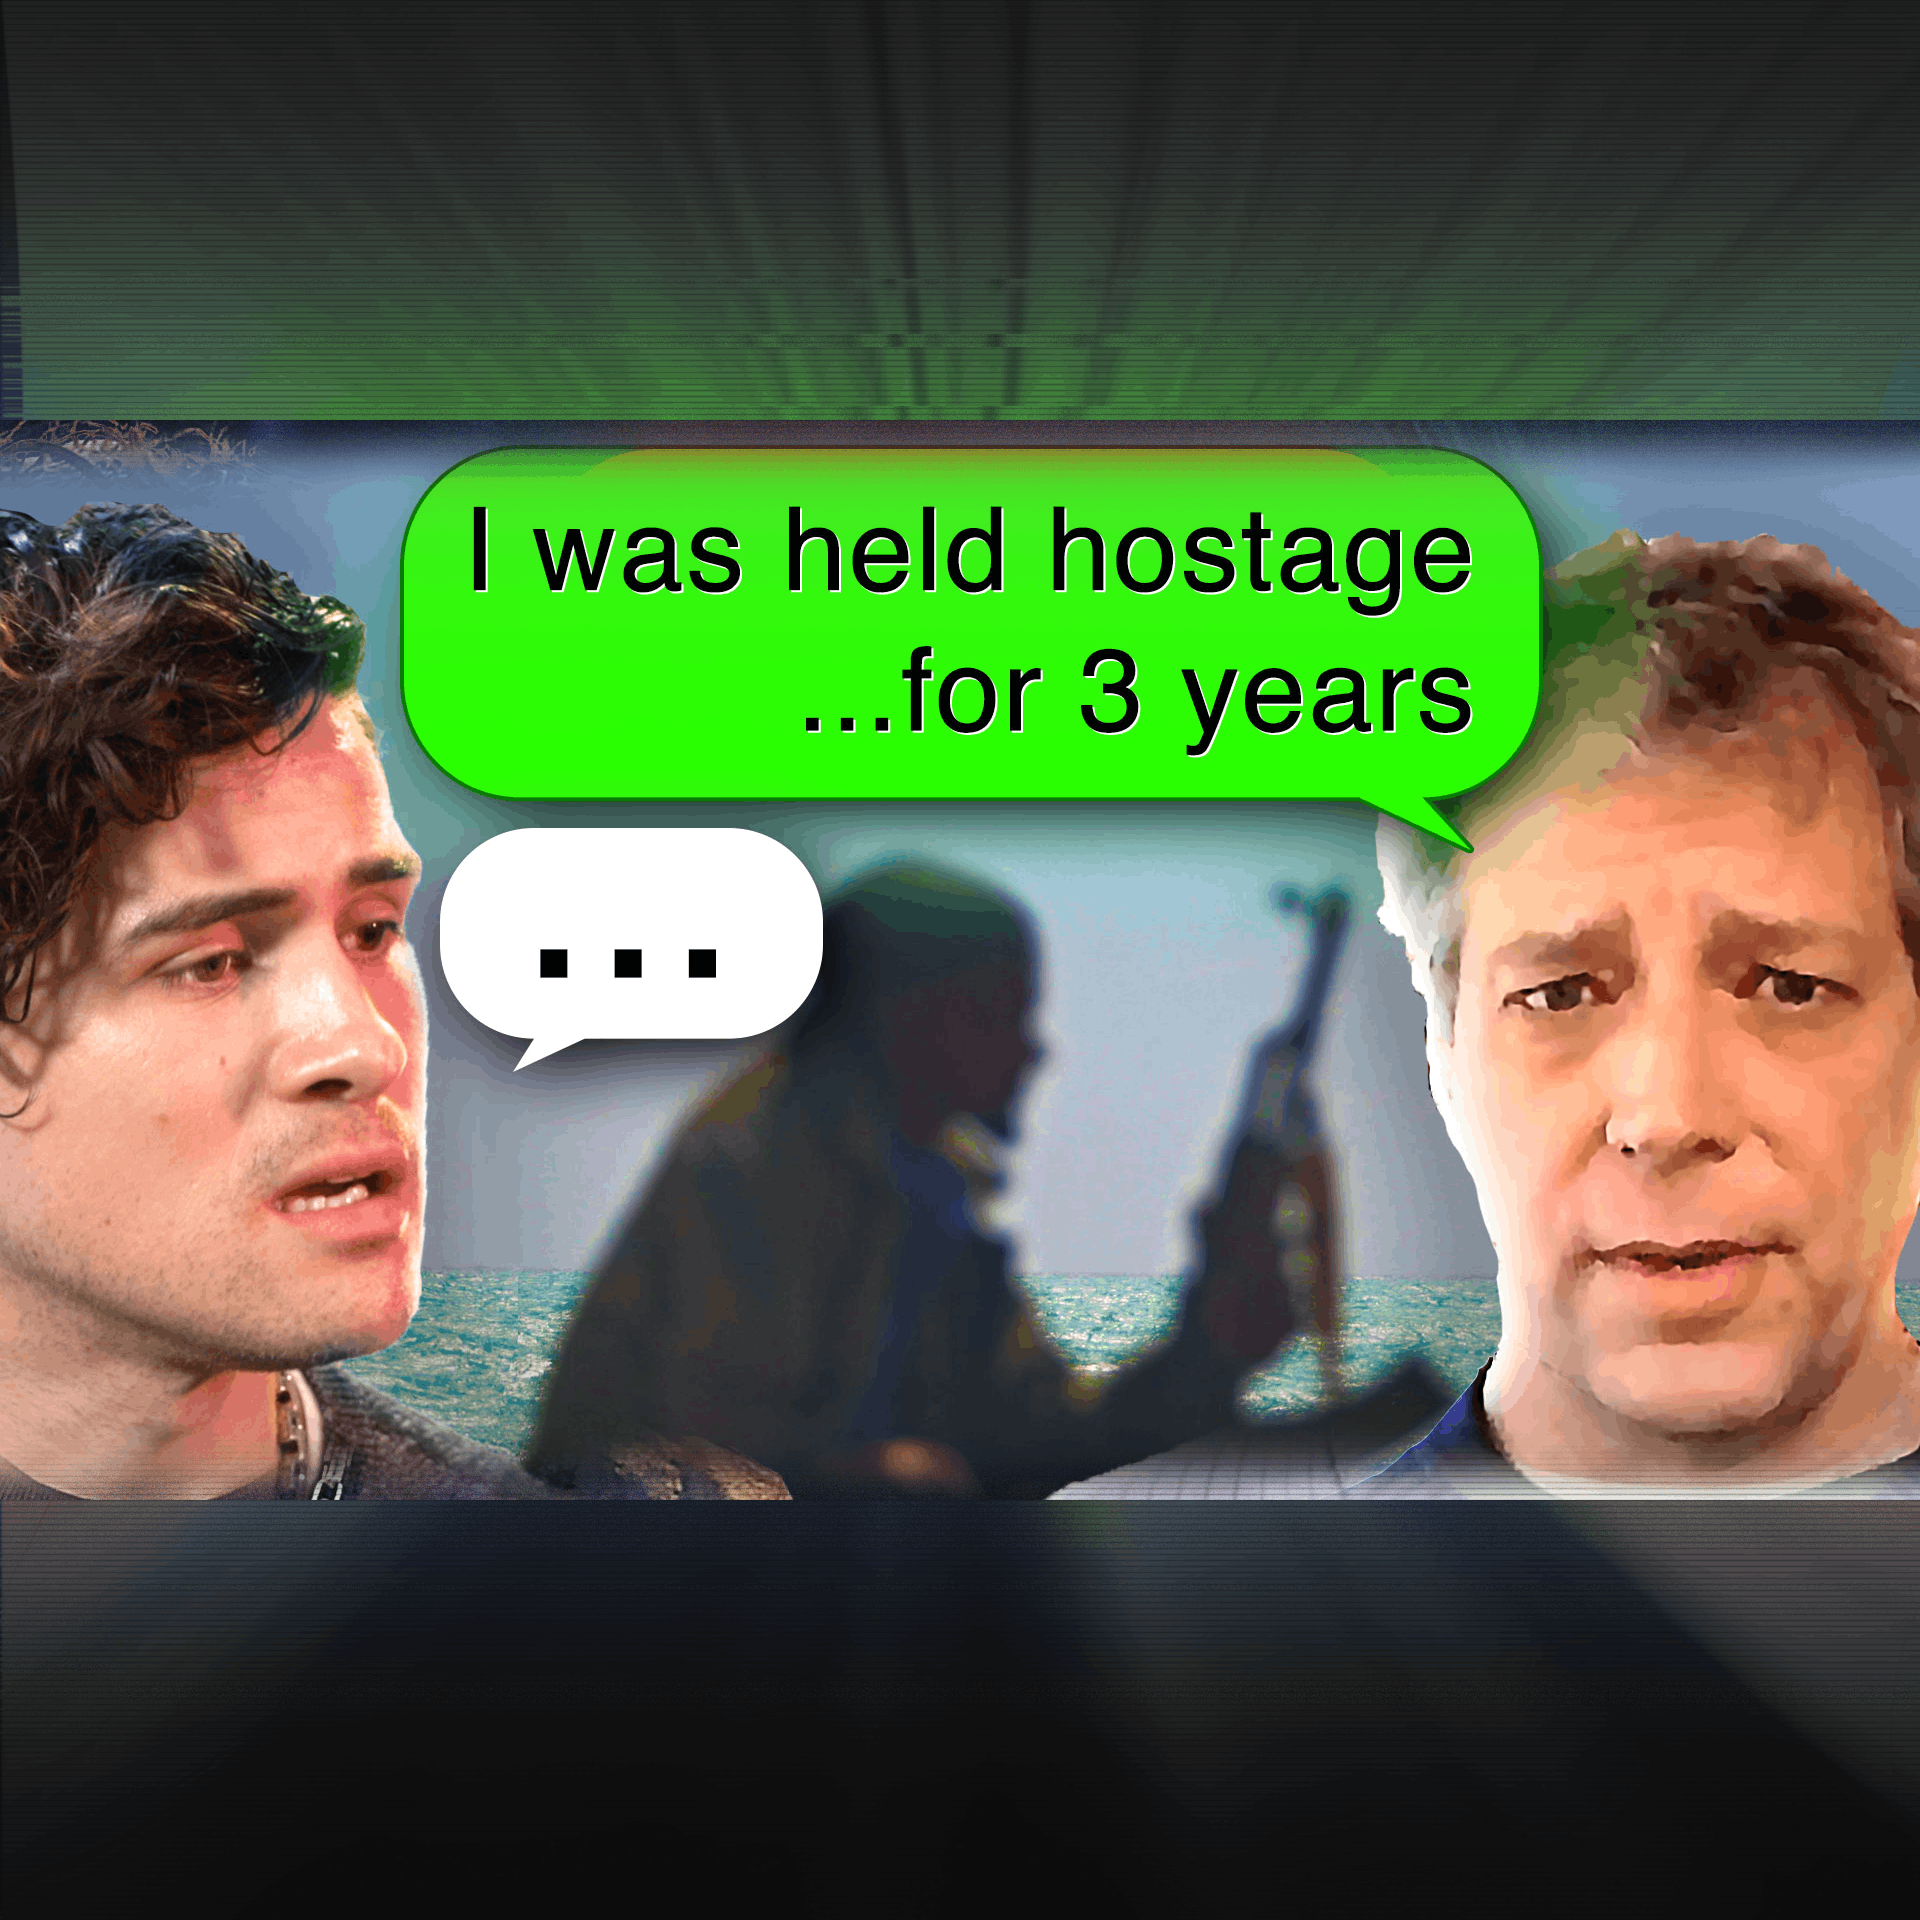 I Spent A Day With HOSTAGE SITUATION SURVIVORS